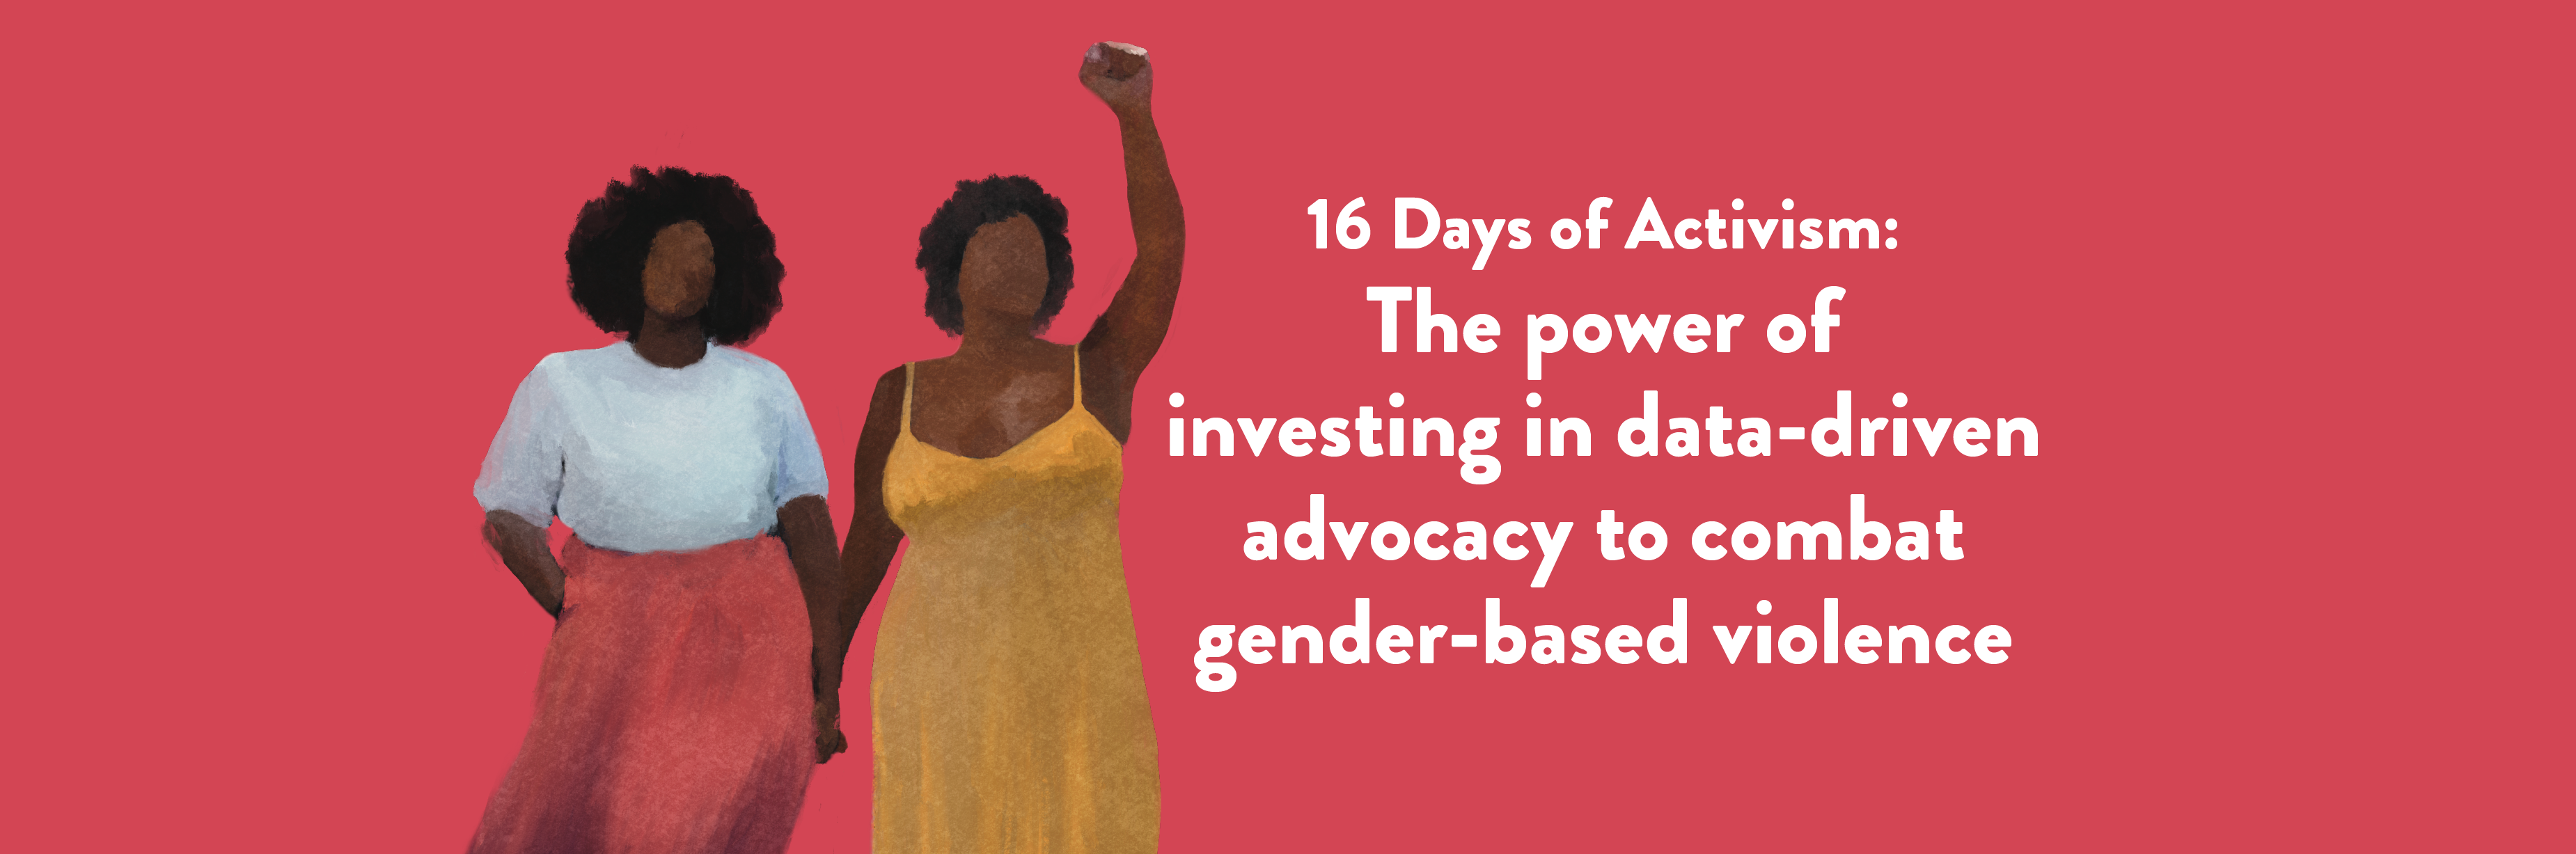 16 Days of Activism: The power of investing in data-driven advocacy to combat gender-based violence (GBV)